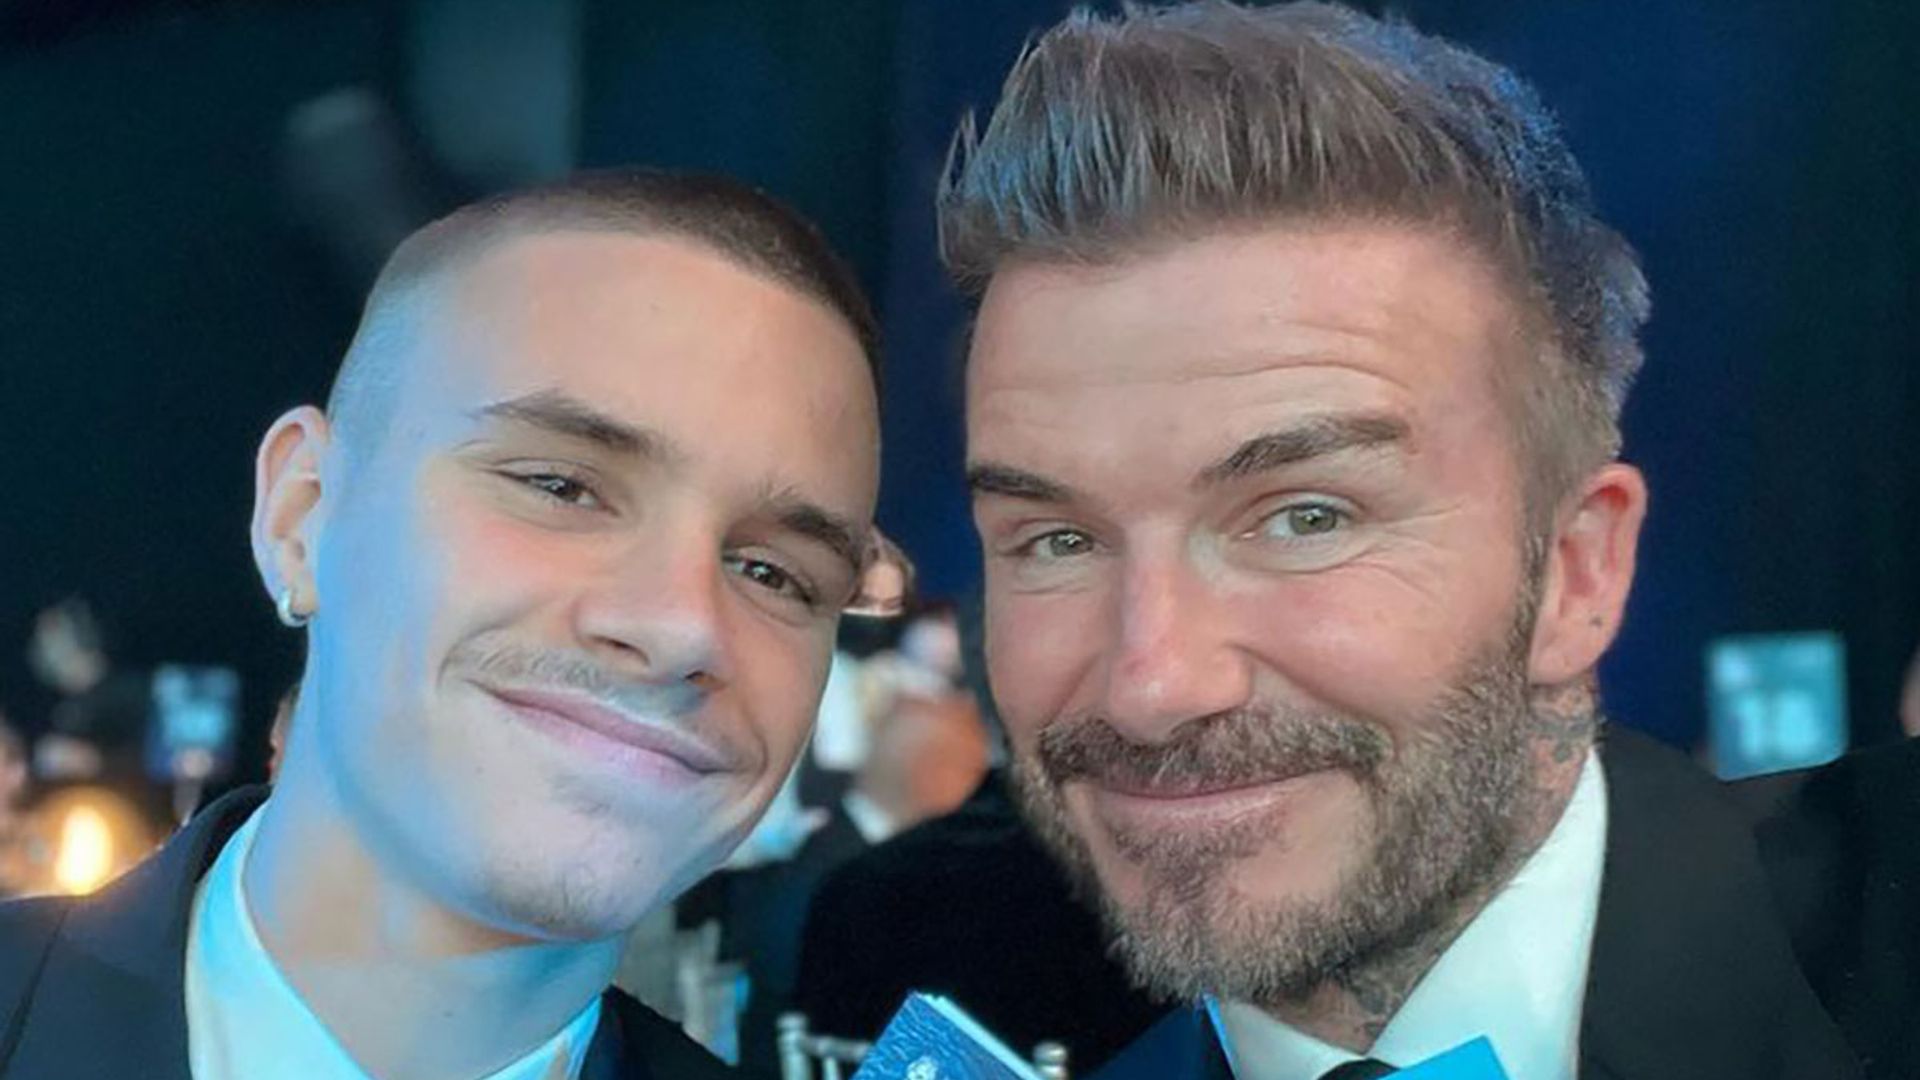 Romeo Beckham, 19, shows off huge neck tattoo identical to dad David's -  and Justin Bieber has a lot to say | HELLO!